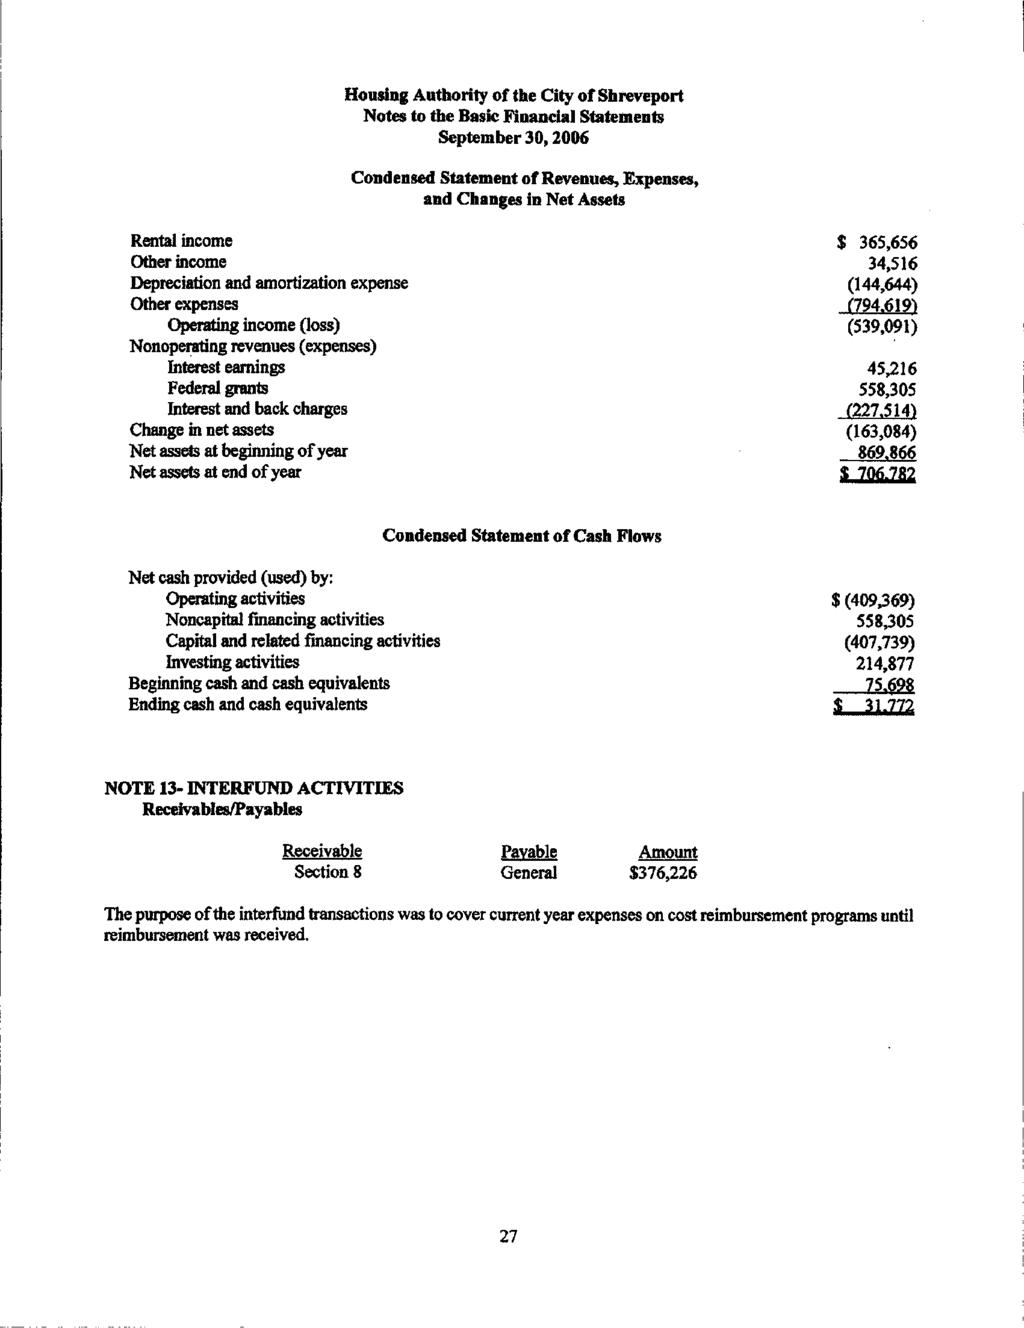 Housing Authority of the City of Shreveport Notes to the Basic Financial Statements September 3,26 Condensed Statement of Revenues, Expenses, and Changes in Net Assets Rental income Other income